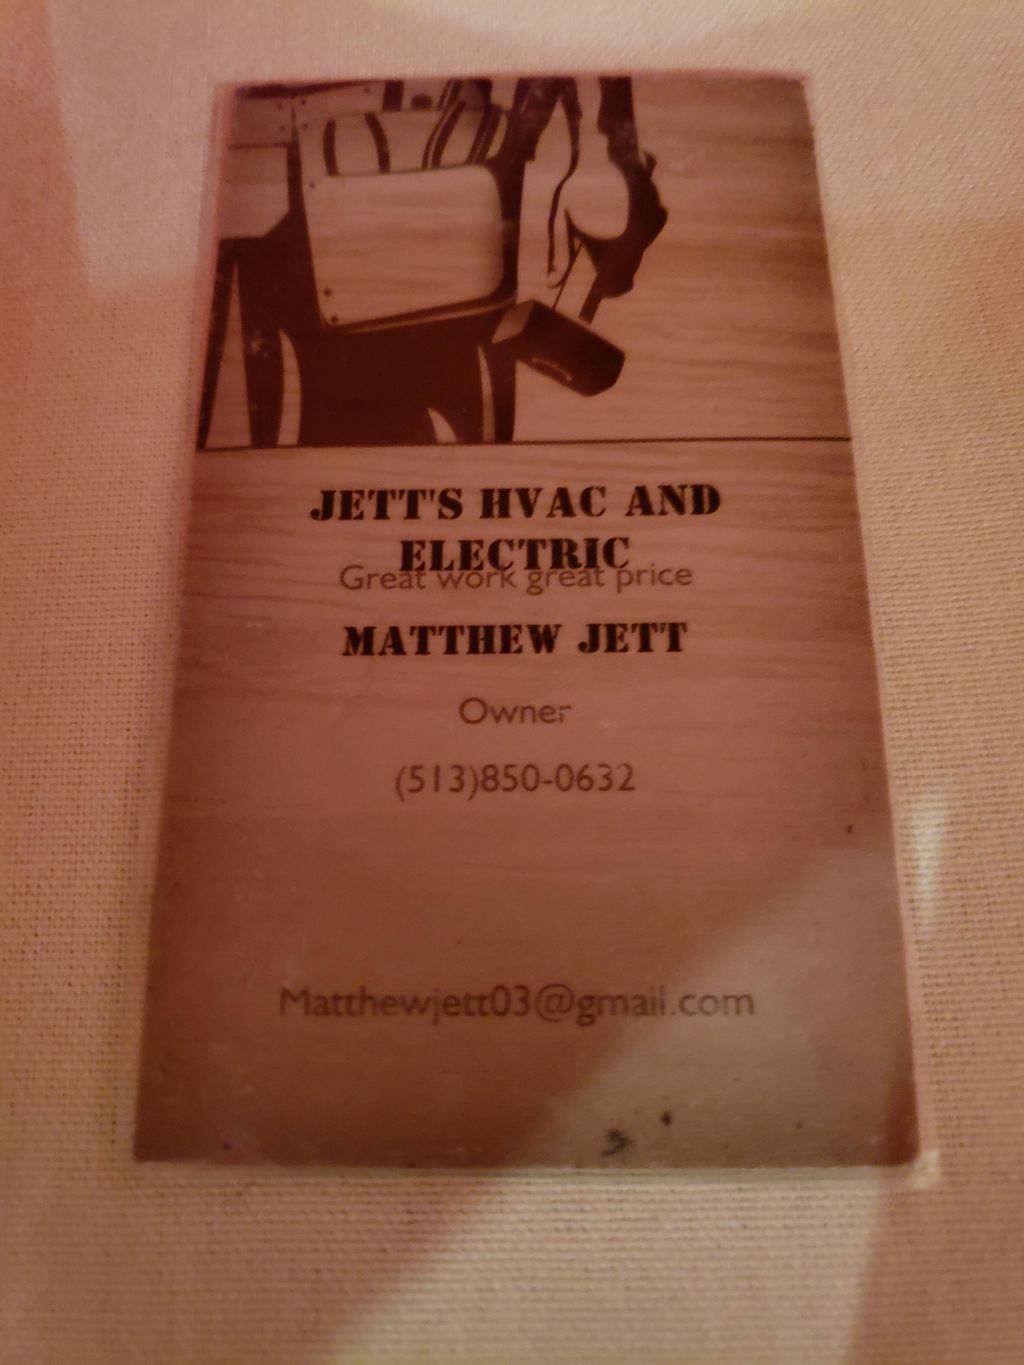 Jetts HVAC and Electrical